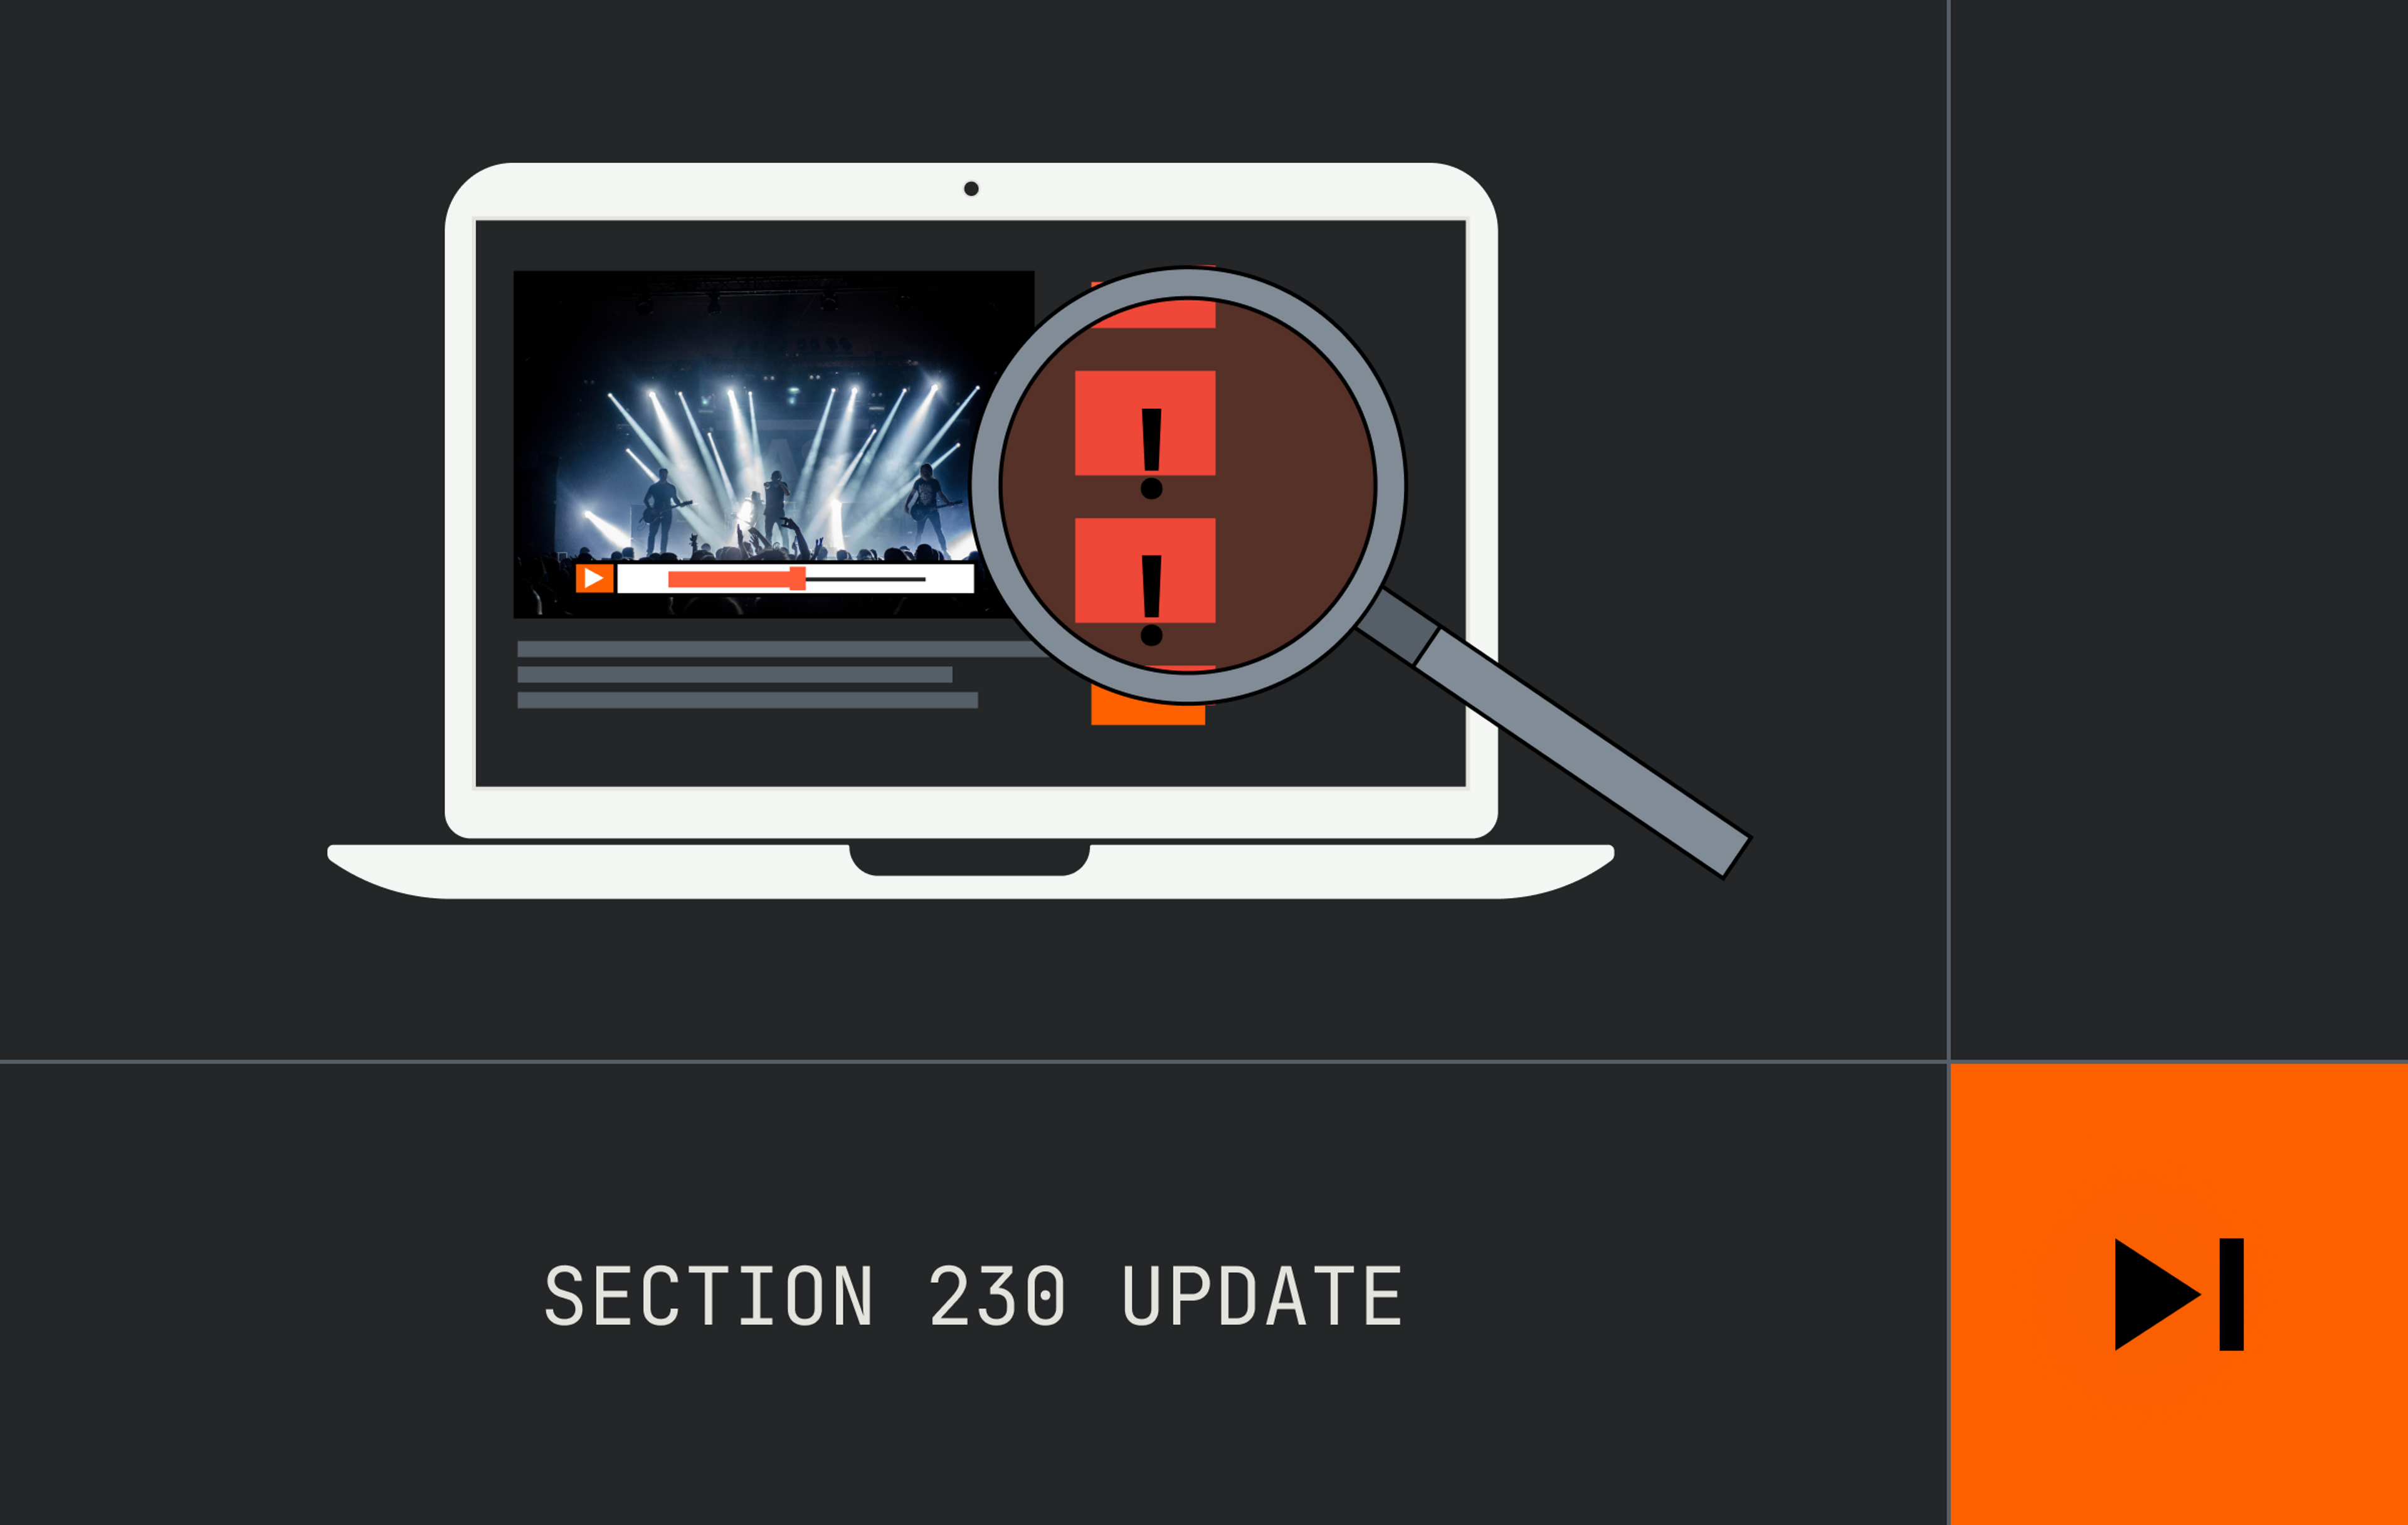 A laptop showing a site similar to YouTube with the recommendation list, a skip button in the bottom left, and text saying "Section 230 update"